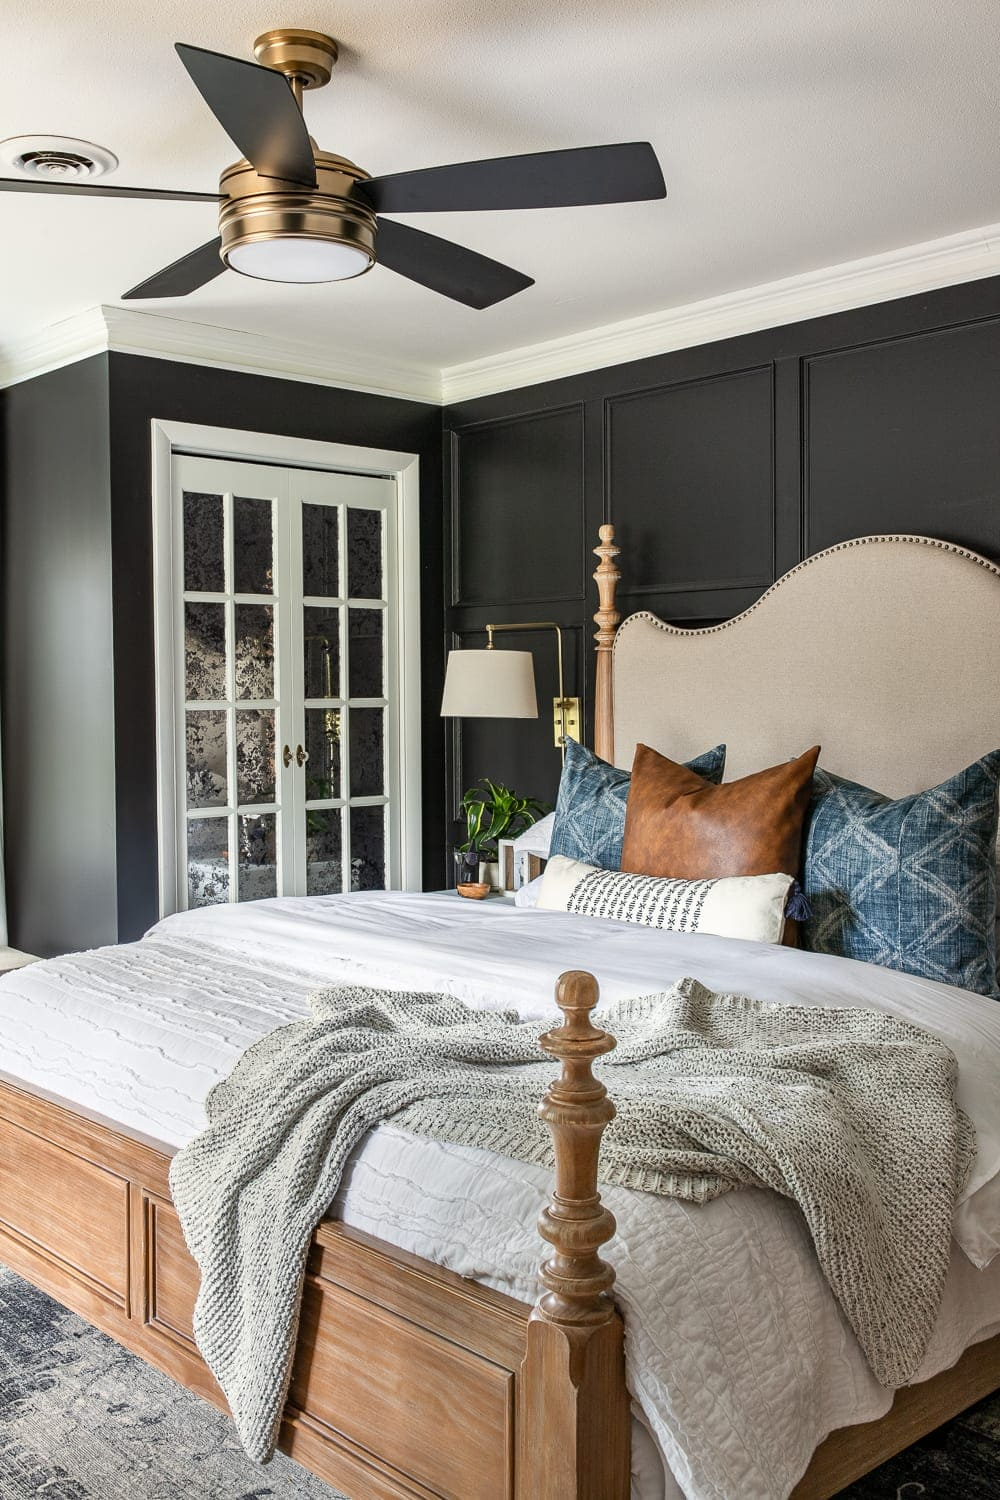 Best Ceiling Fans: Options for Any Style
  or Budget